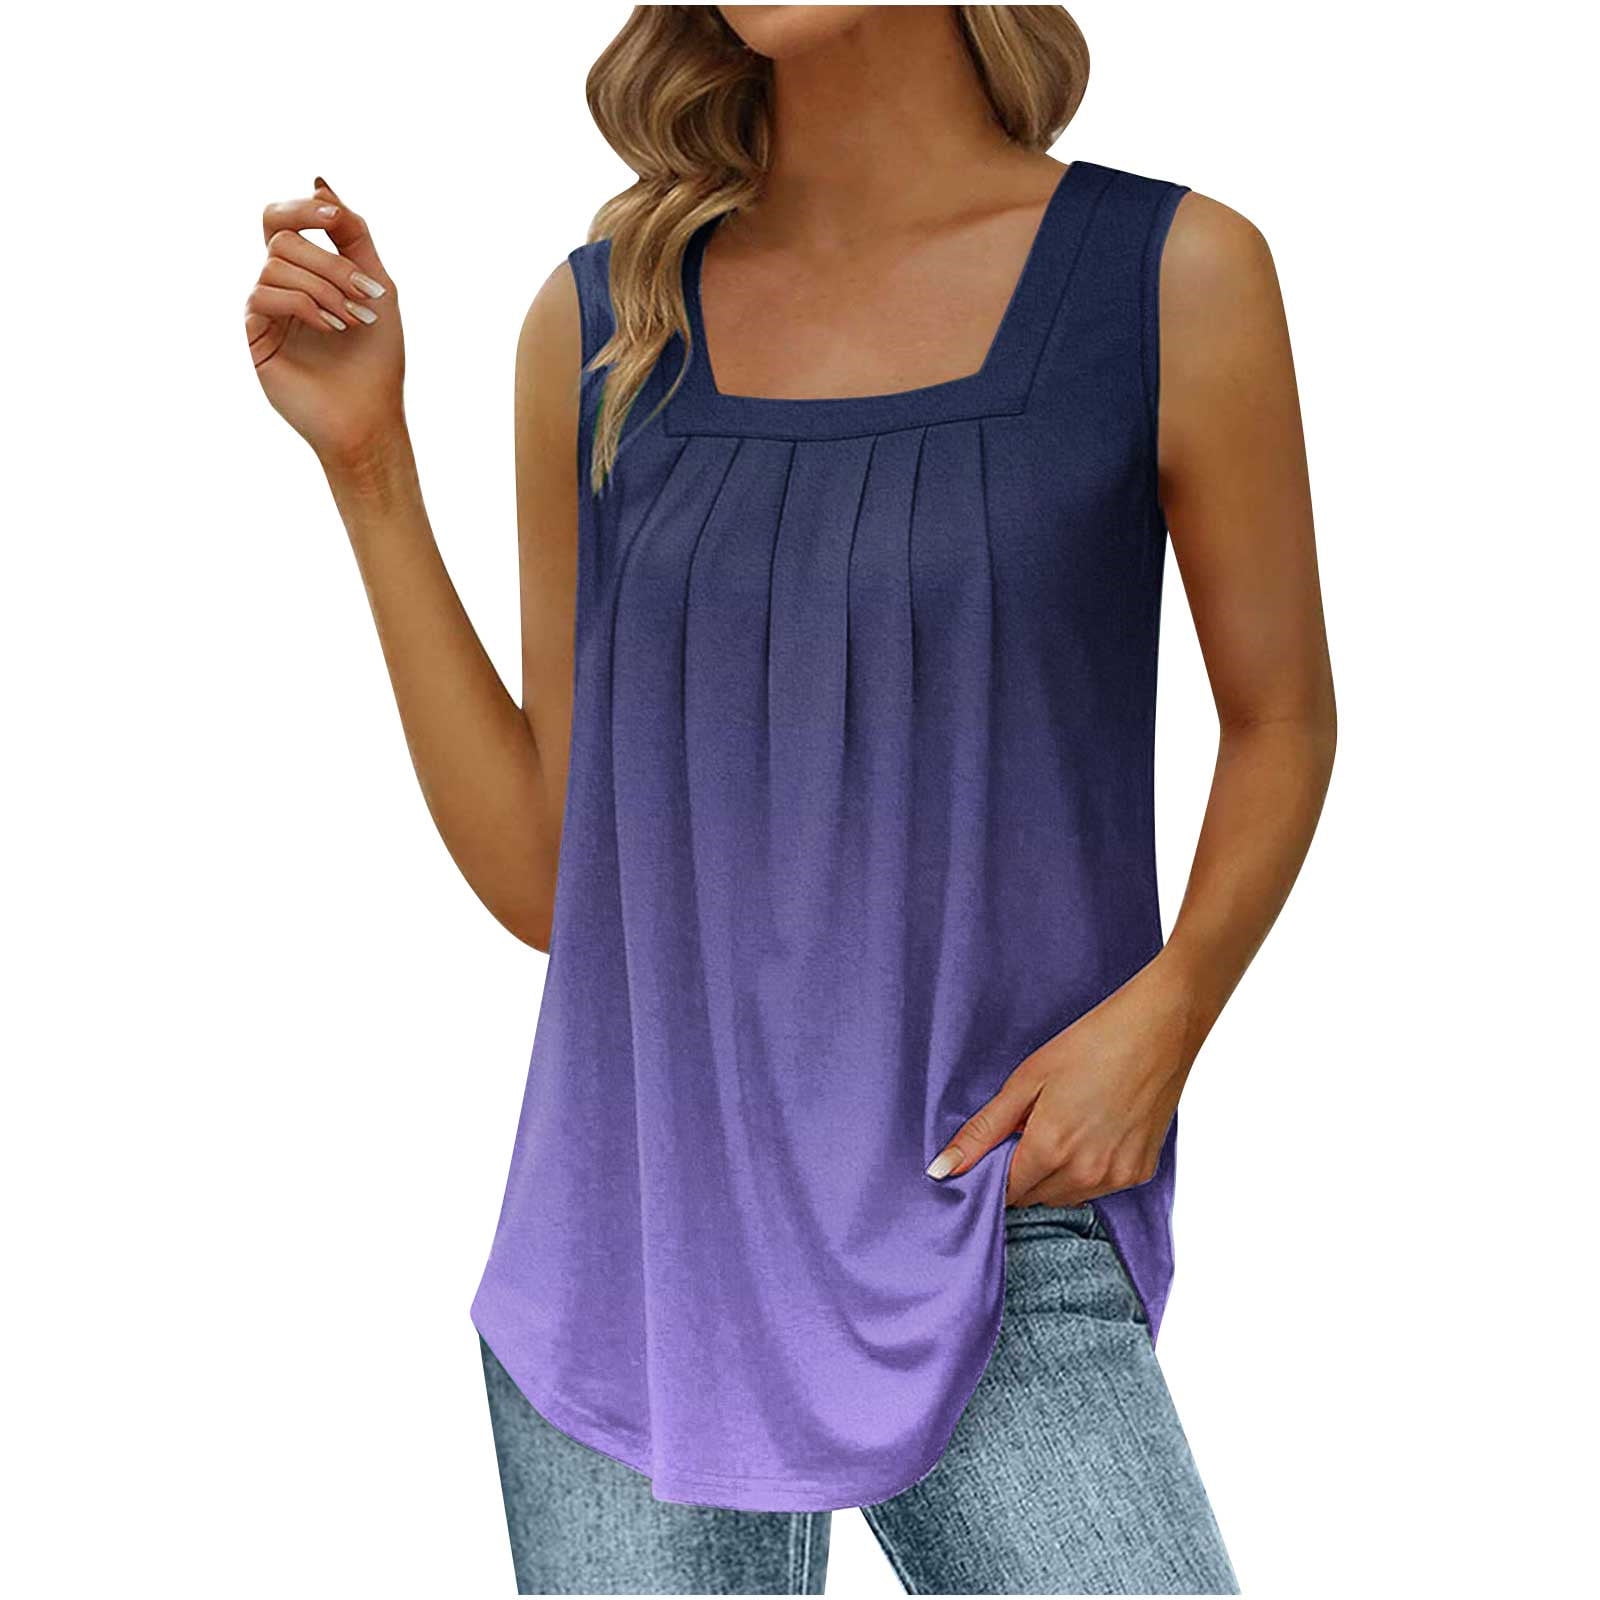 HAPIMO Women's Fashion Tank Tops Pleat Flowy Clothes for Girls Tummy Control  Blouses Square Neck T-shirt Ombre Stripe Print Tops Sleeveless Tees Purple  S 